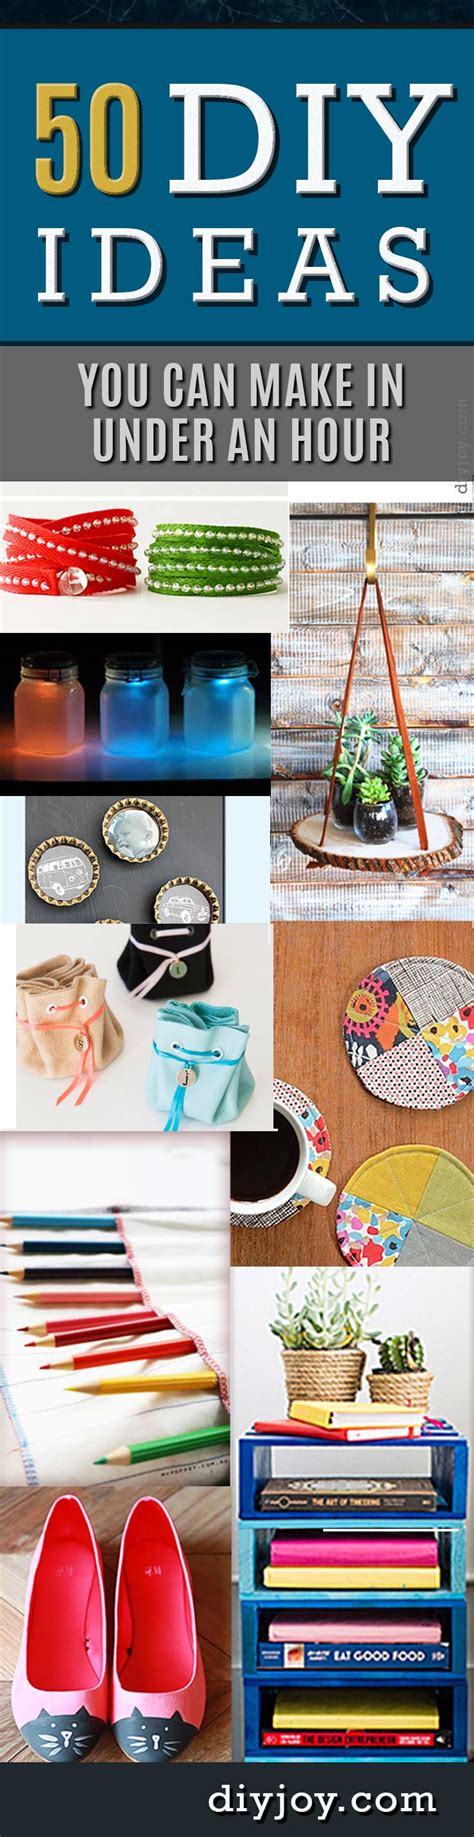 50 Diy Projects You Can Make In Under An Hour Diy Joy